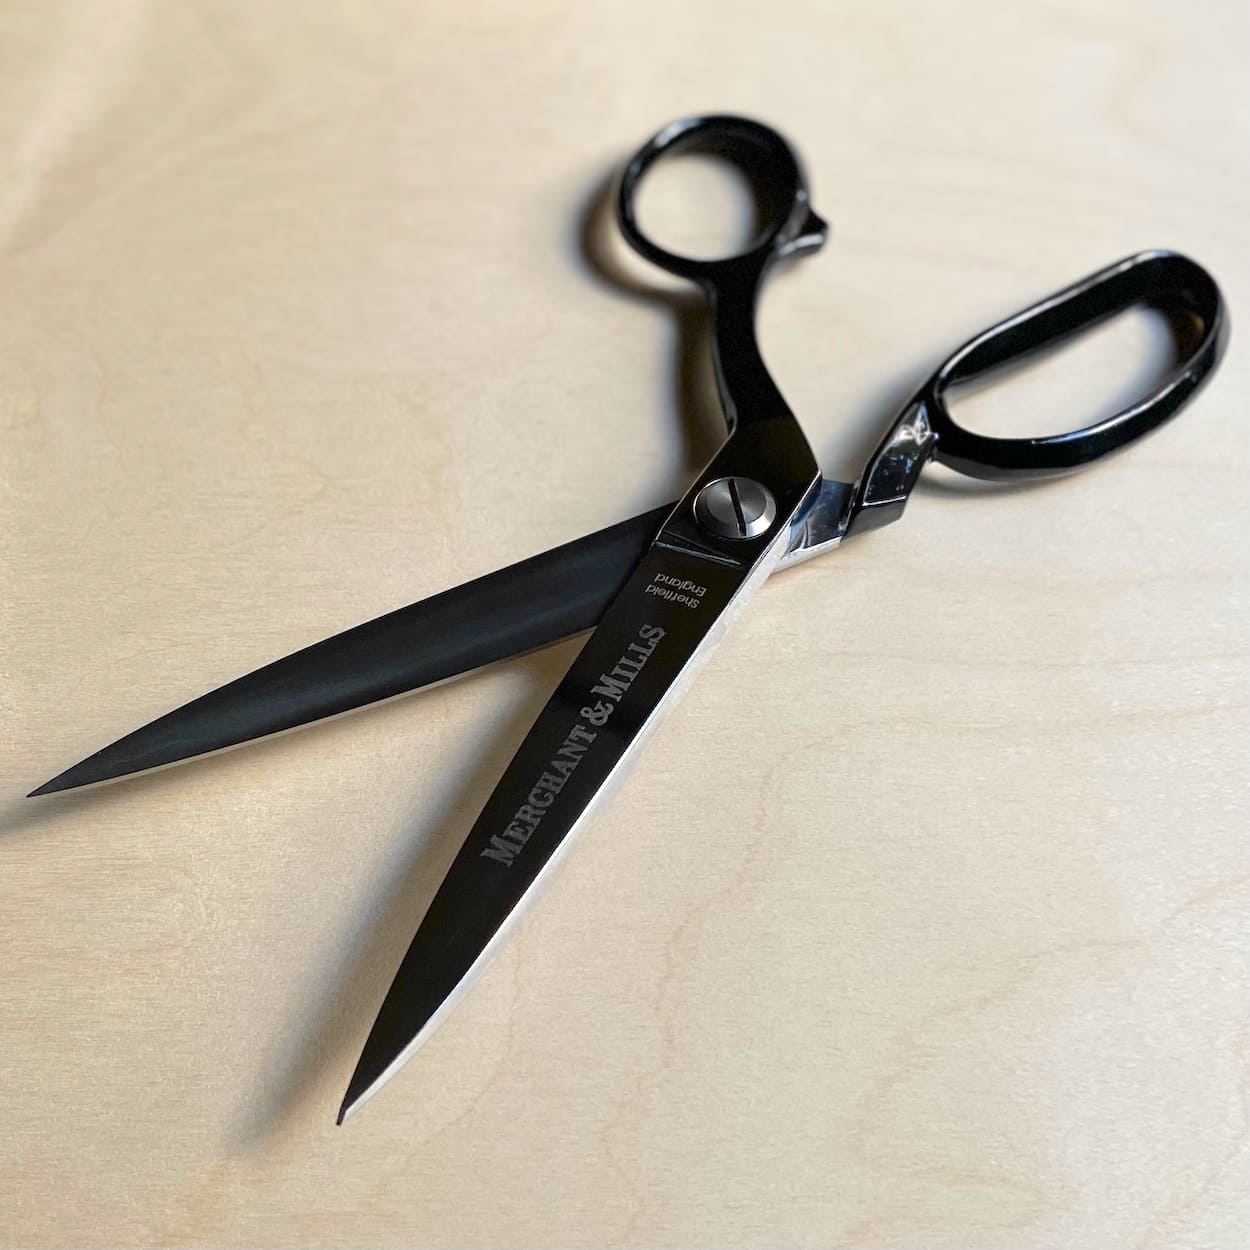 Sidebent Tailor's Shears - Ten Inch